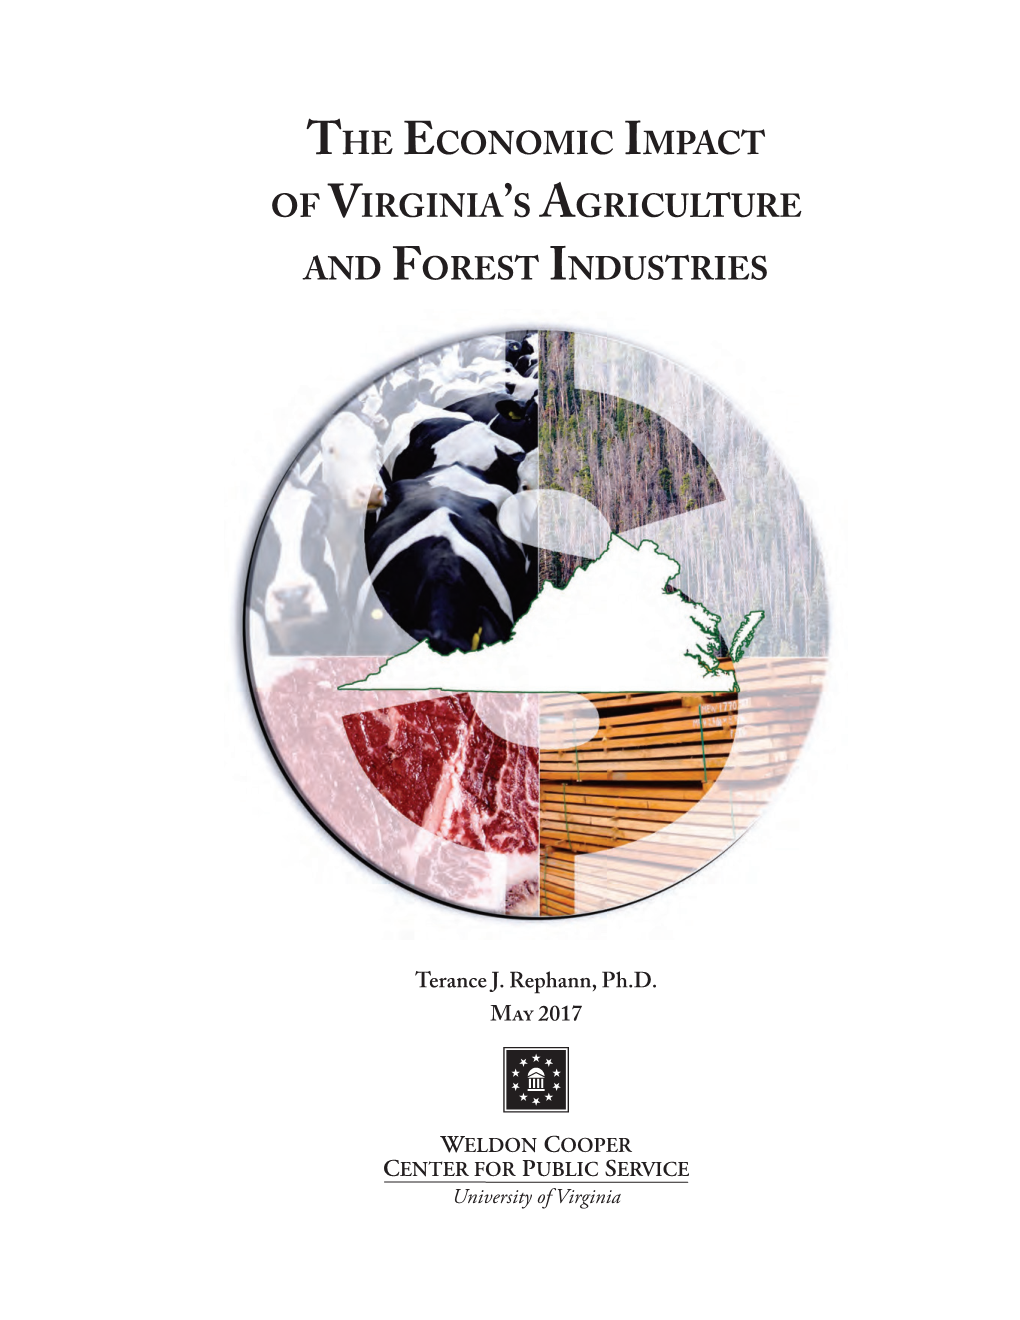 The Economic Impacts of Agriculture and Forest Industries in Virginia